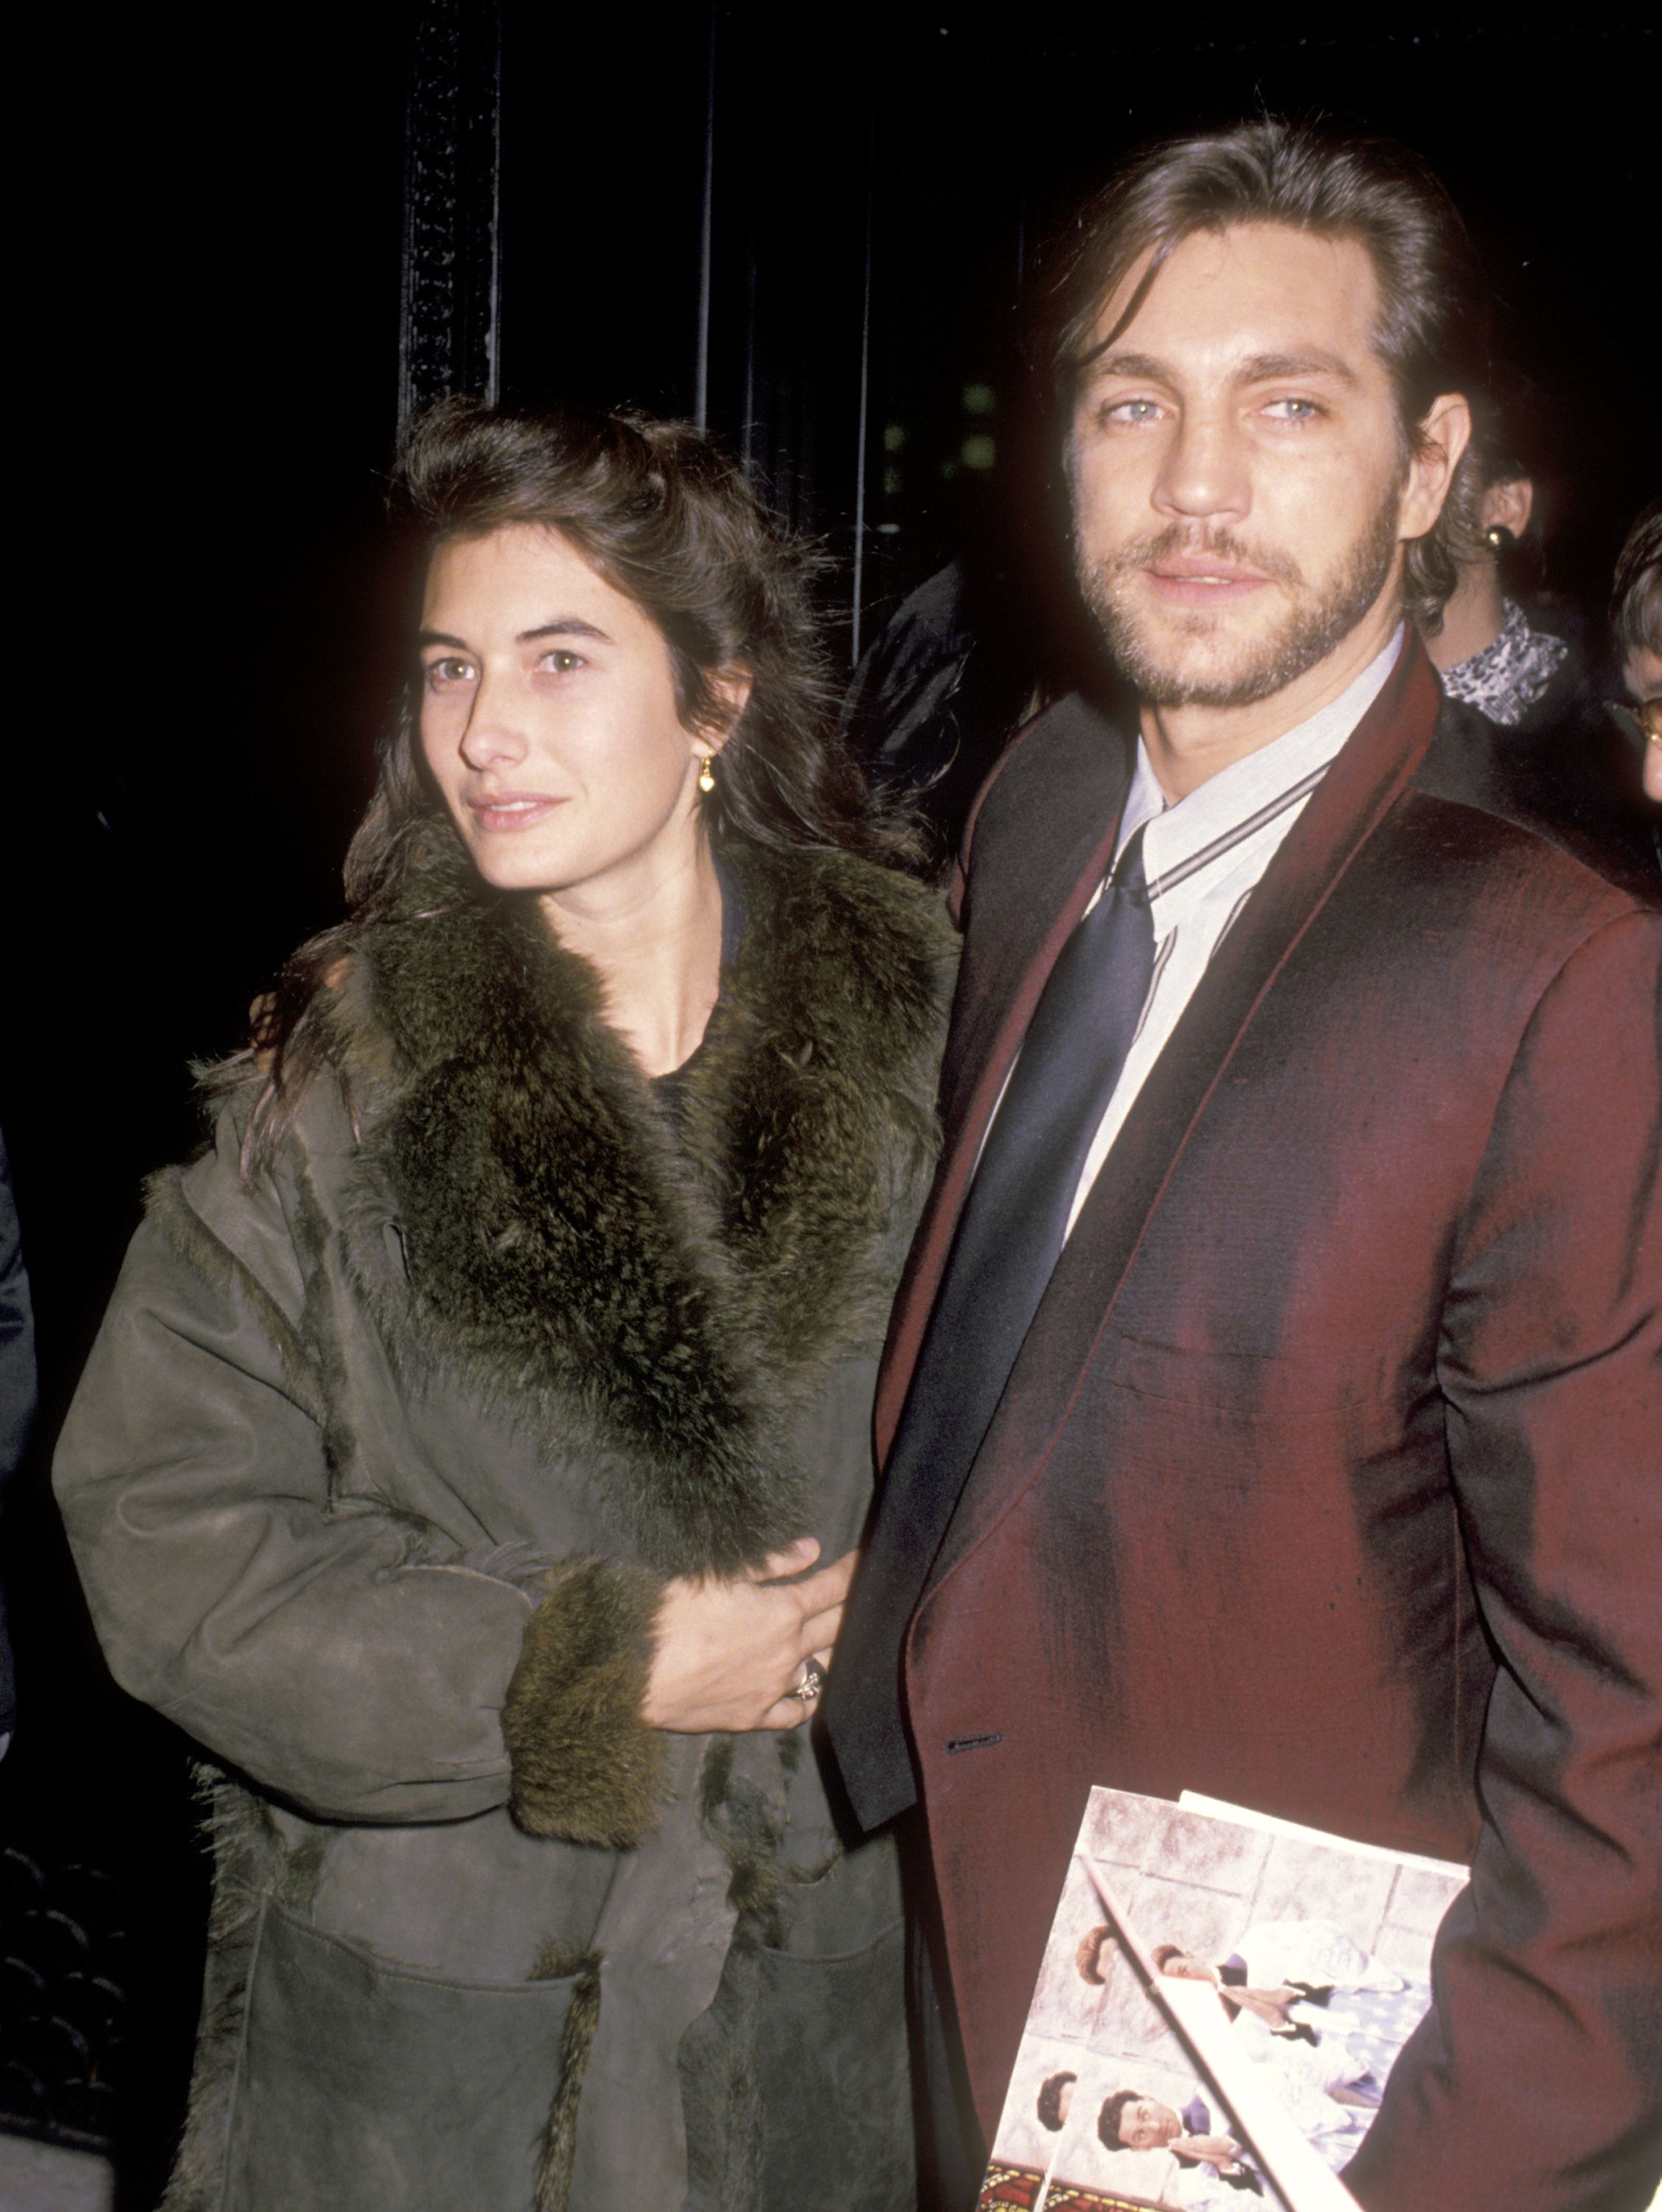 Eric Roberts and Kelly Cunningham during the 'We're No Angels' New York City Premiere on December 13, 1989, at Loews 19th Street Theater in New York City, New York. | Source: Getty Images